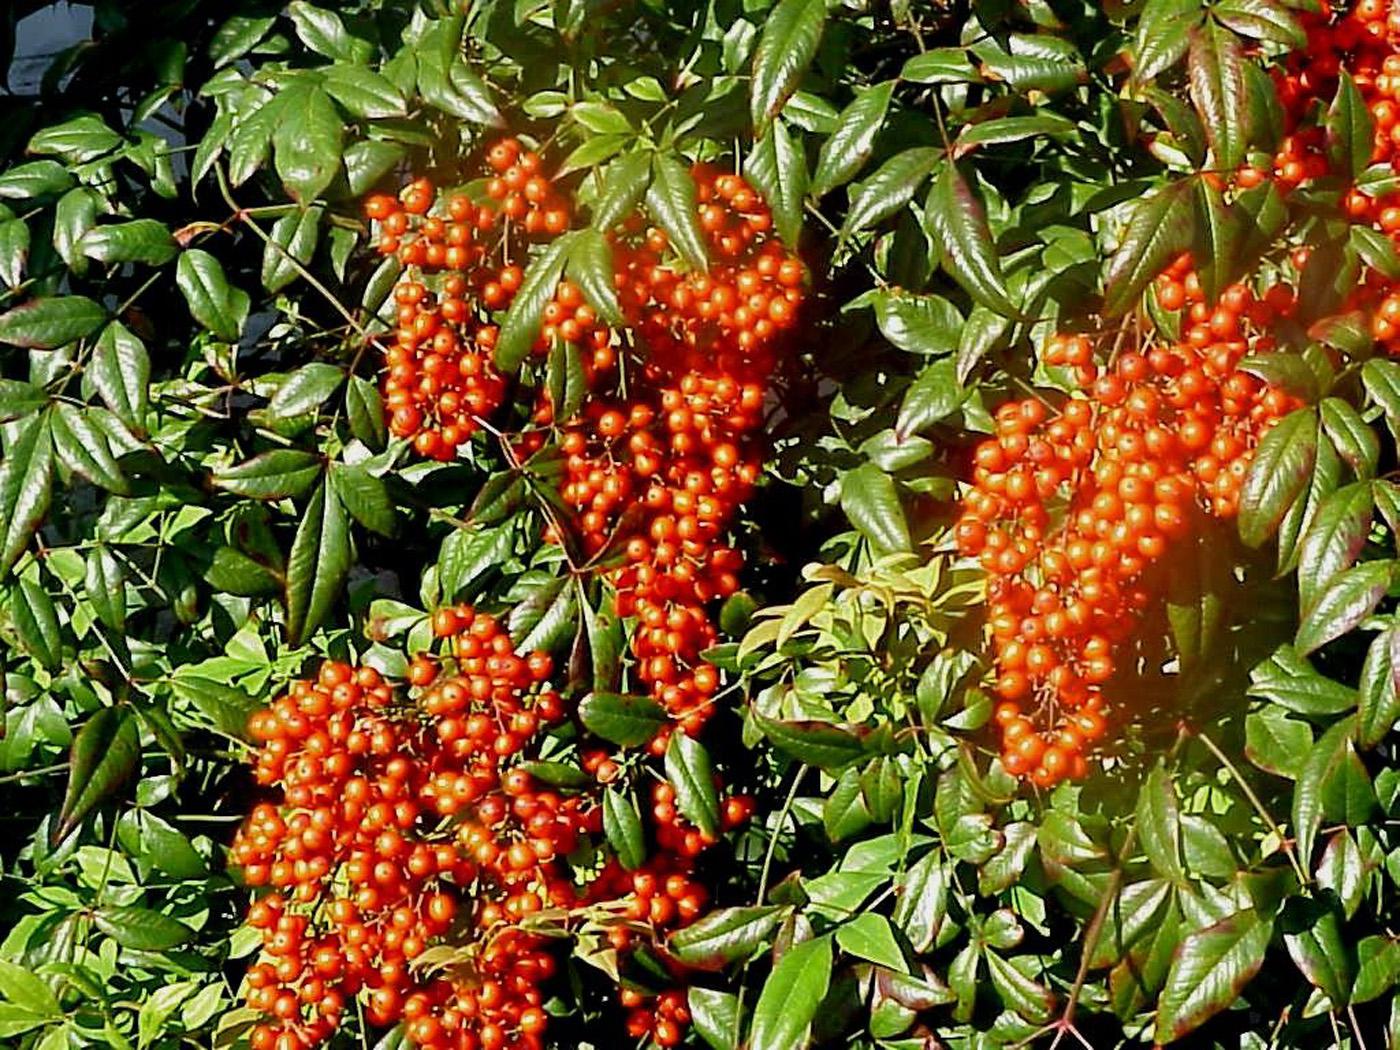 With almost indescribable leaf color and huge panicles of bright red berries, nandinas are among the very best shrubs for fall and winter color in terms of both leaves and fruit.